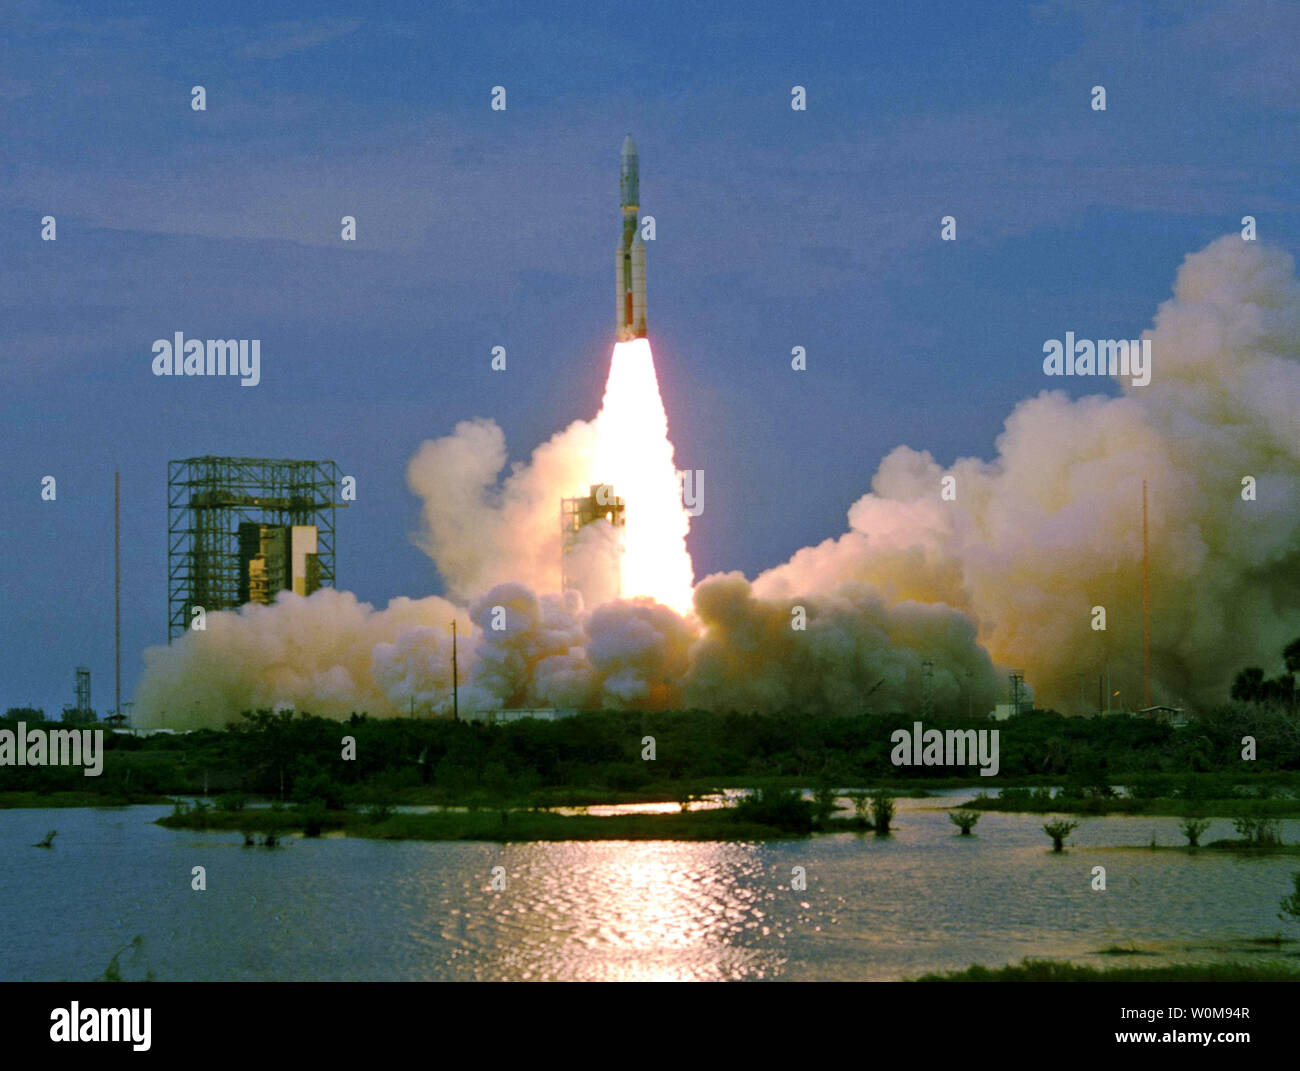 Viking 1 launches from NASA's Kennedy Space Center on August 20, 1975, bound for Mars. A twin spacecraft, Viking 2, followed about three weeks later. Viking I touched down on the surface of Mars 30 years ago on July 20, 1976. (UPI Photo/NASA) Stock Photo